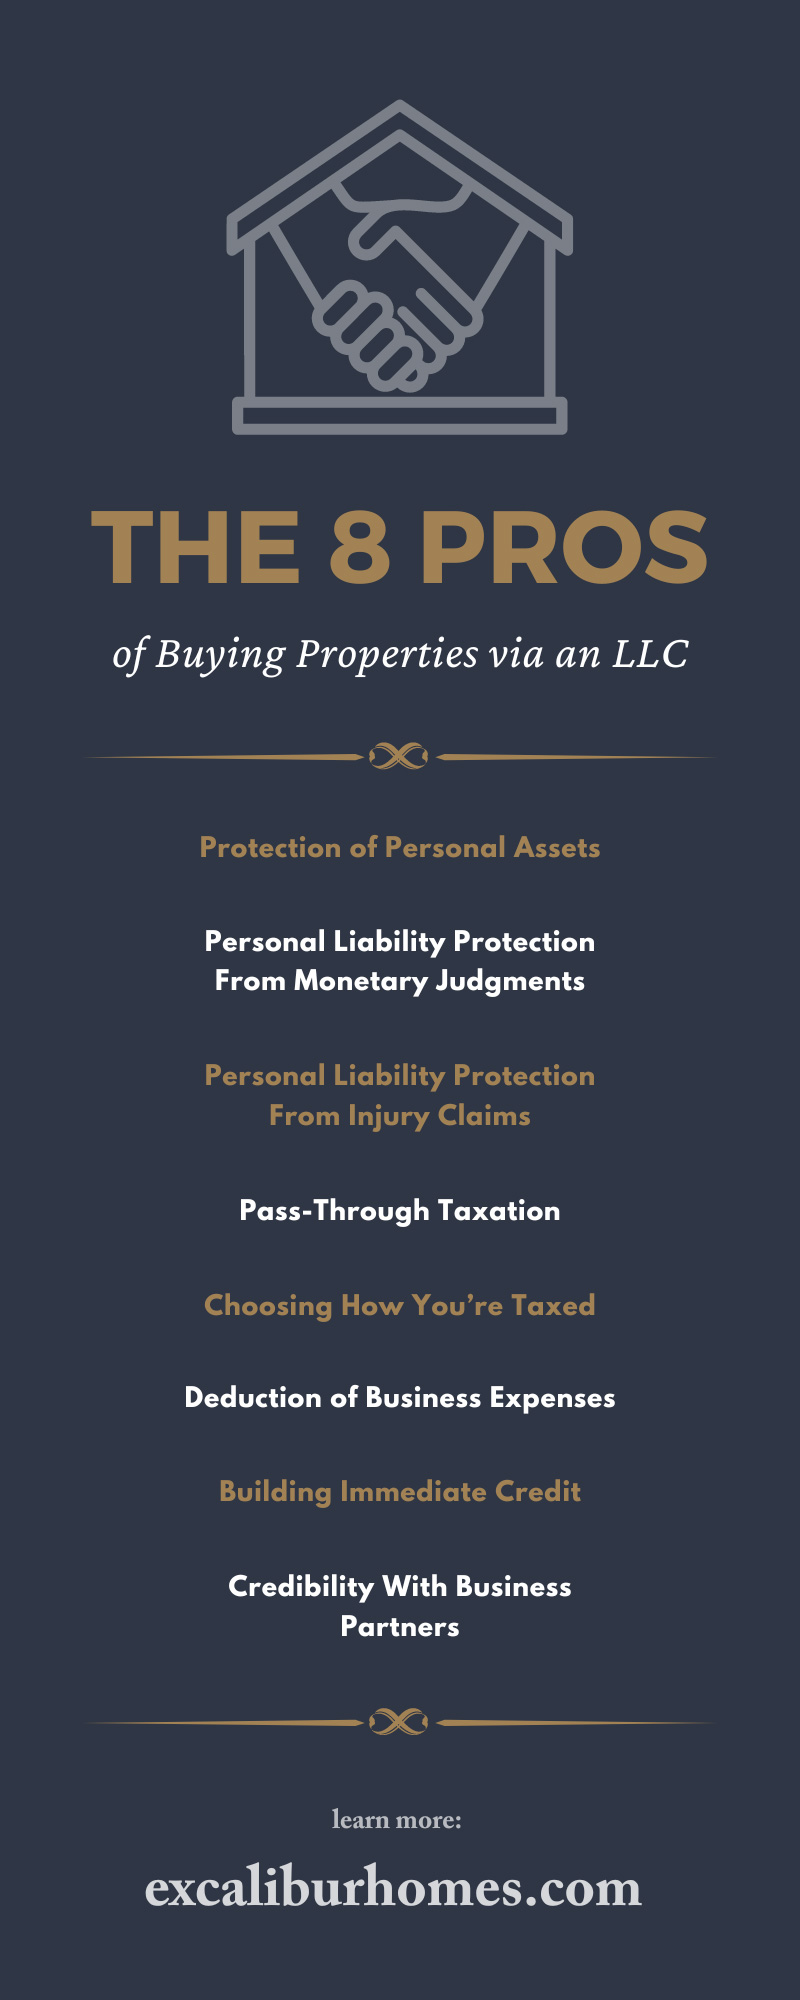 The 8 Pros of Buying Properties via an LLC